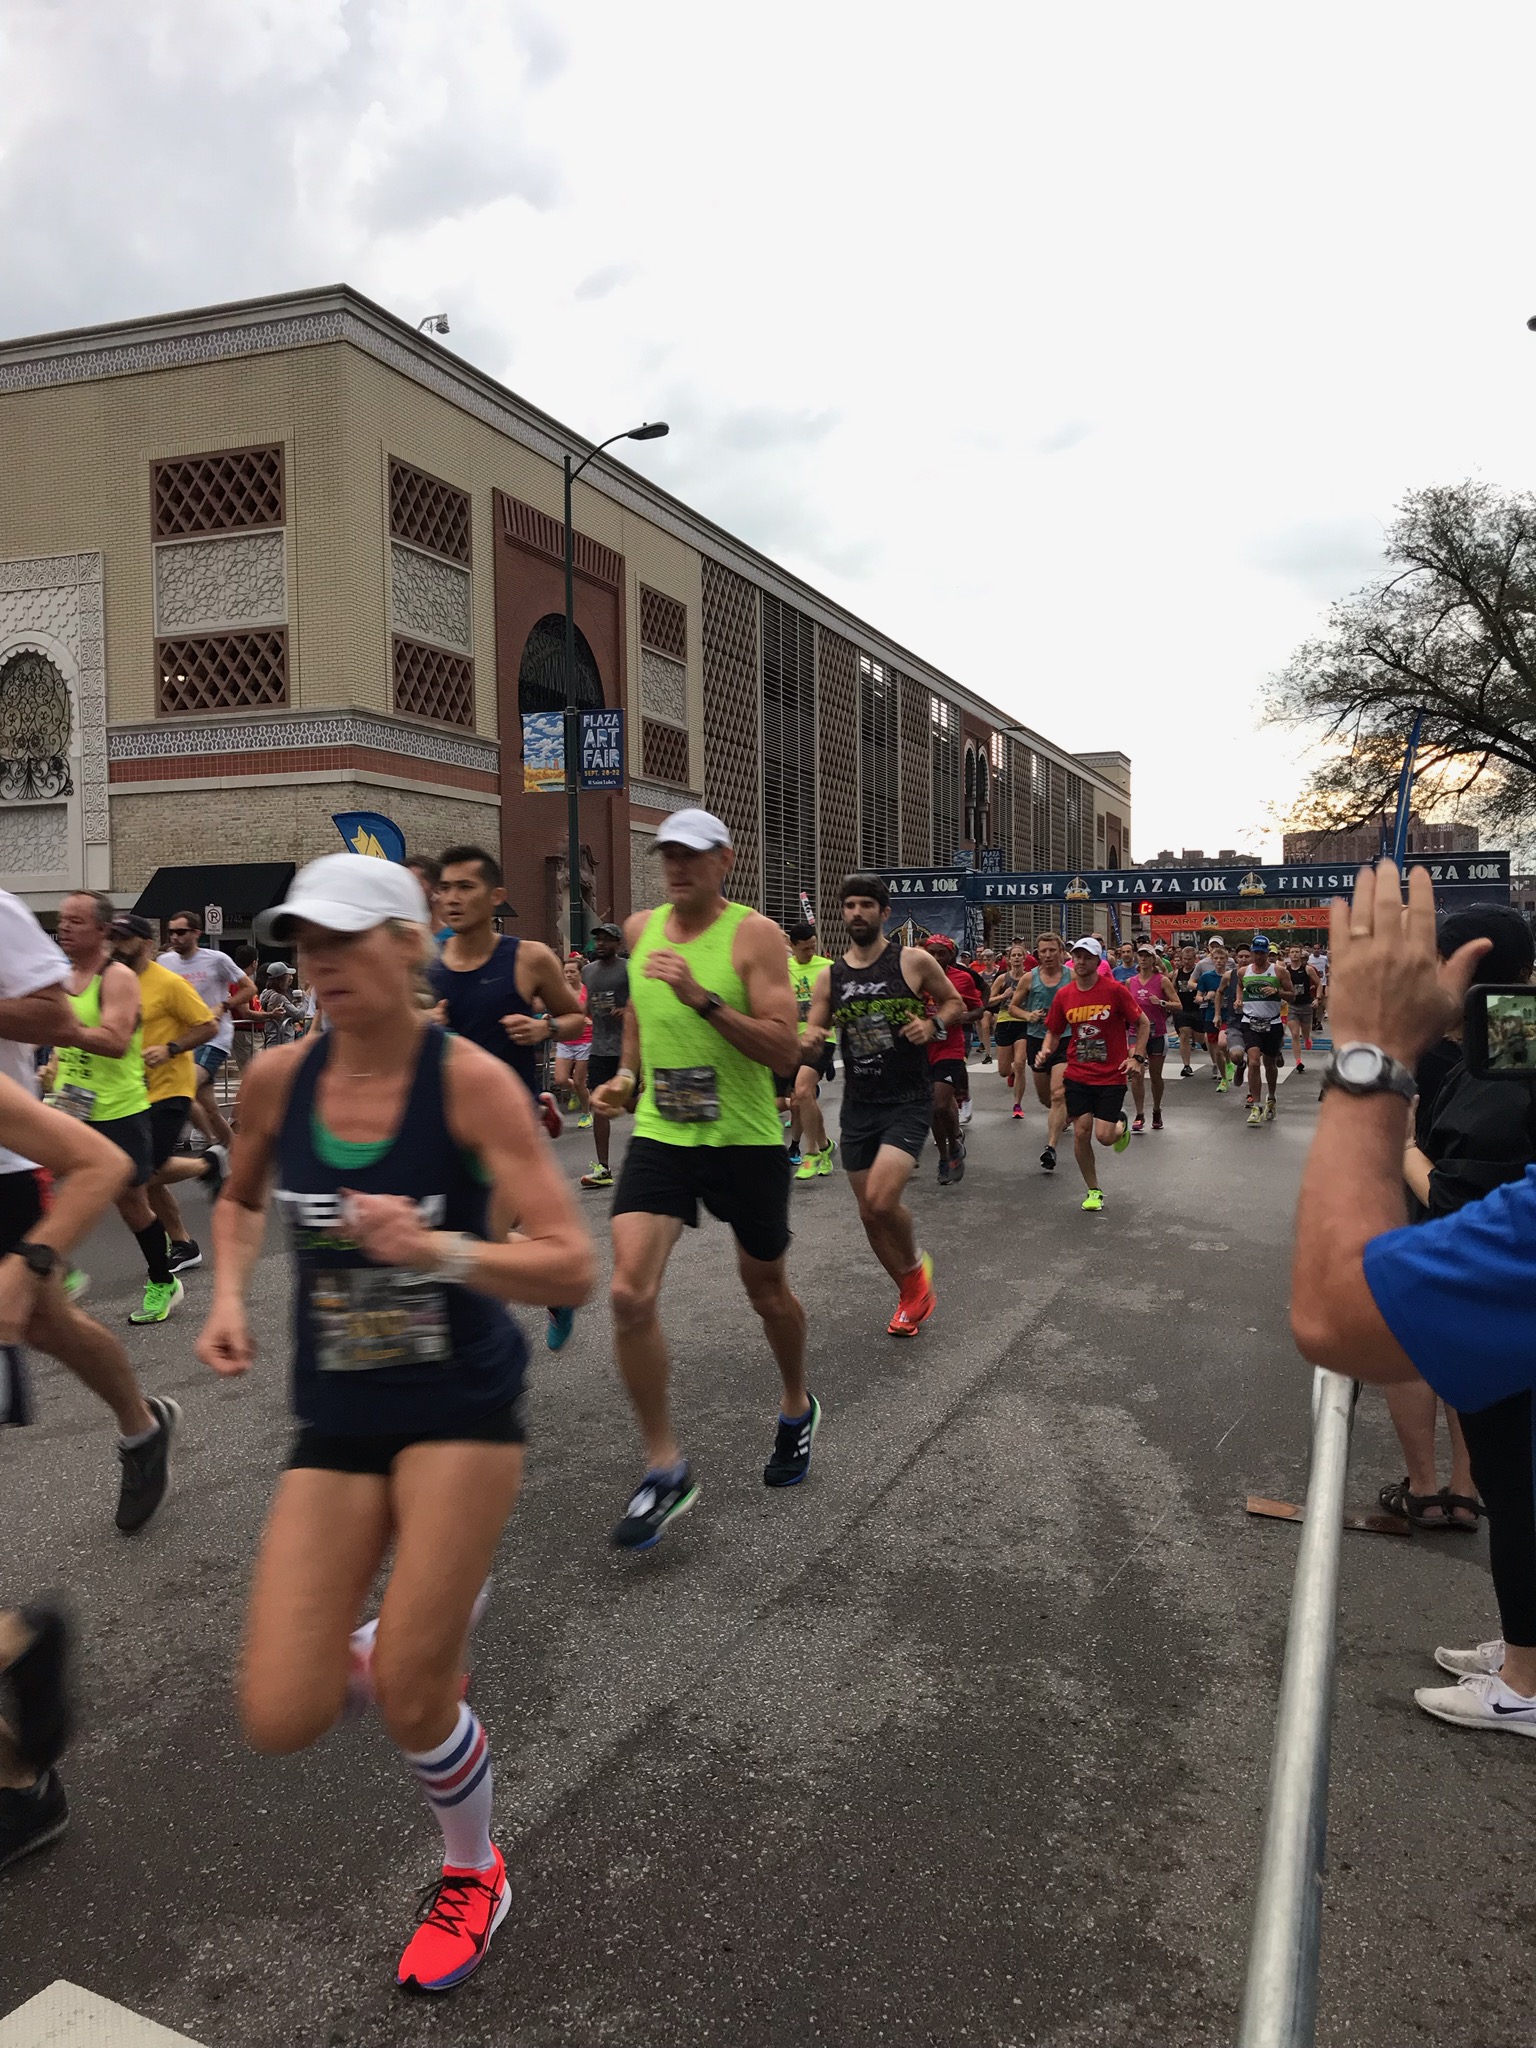 Runners competing in the 9th Annual Plaza 10K